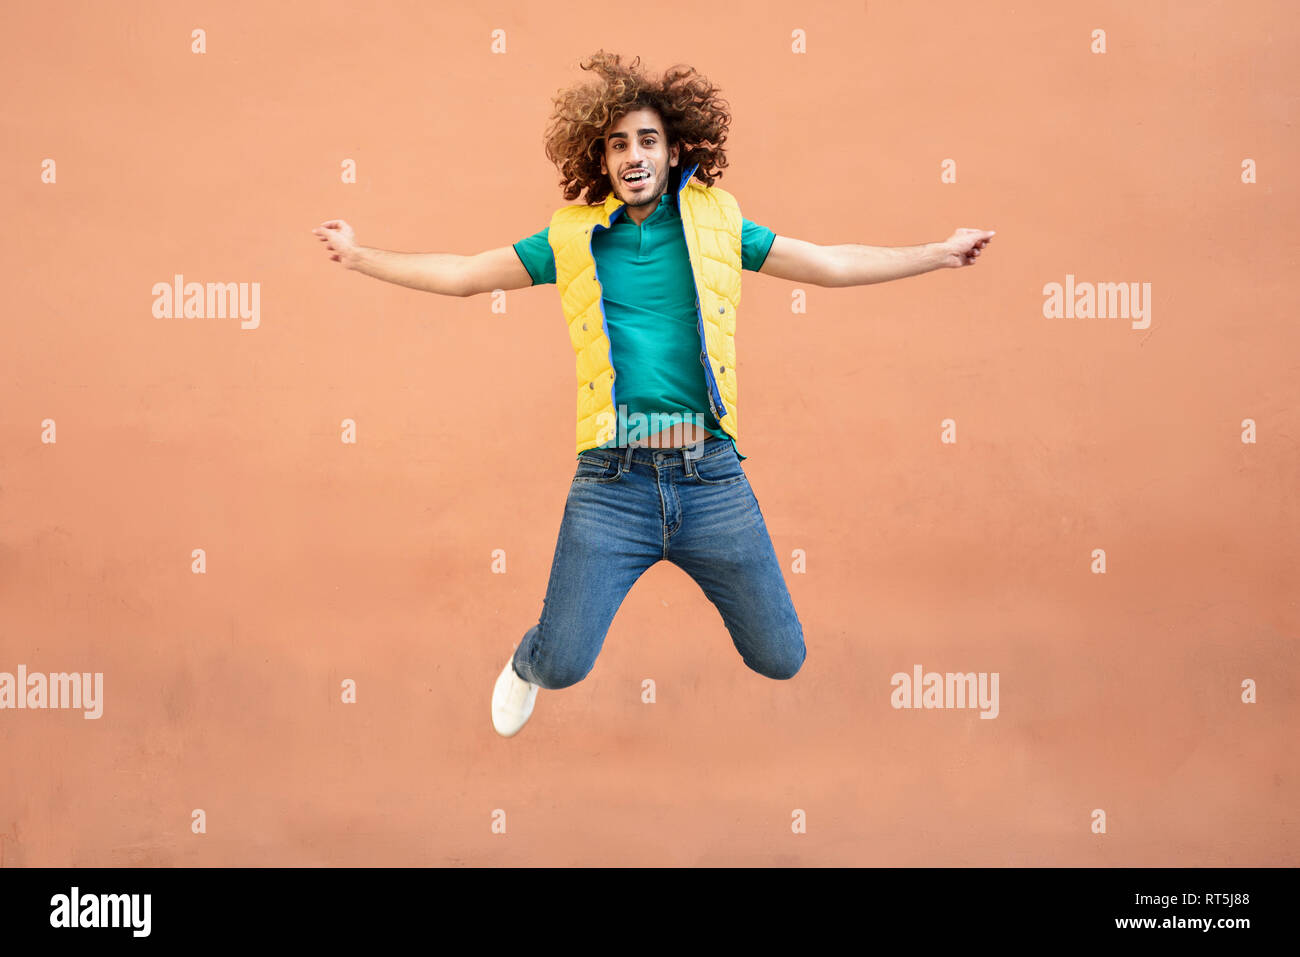 Portrait of smiling young man with curly hair wearing yellow waistcoat jumping in the air Stock Photo